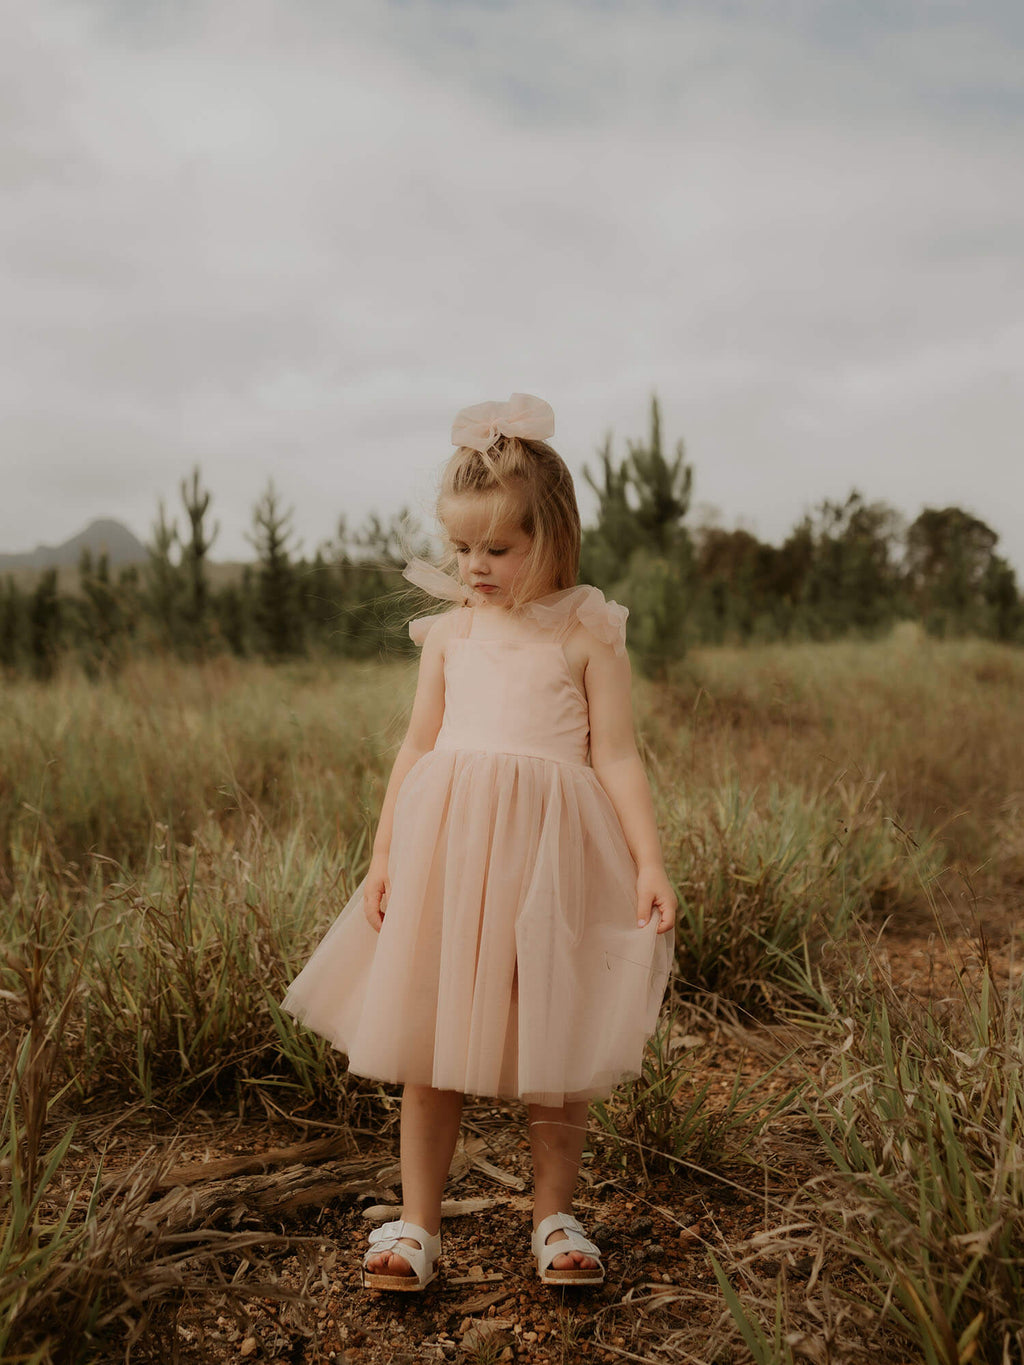 Isla champagne flower girl dress is worn by a young girl. She also wears a matching champagne tulle bow in her hair.